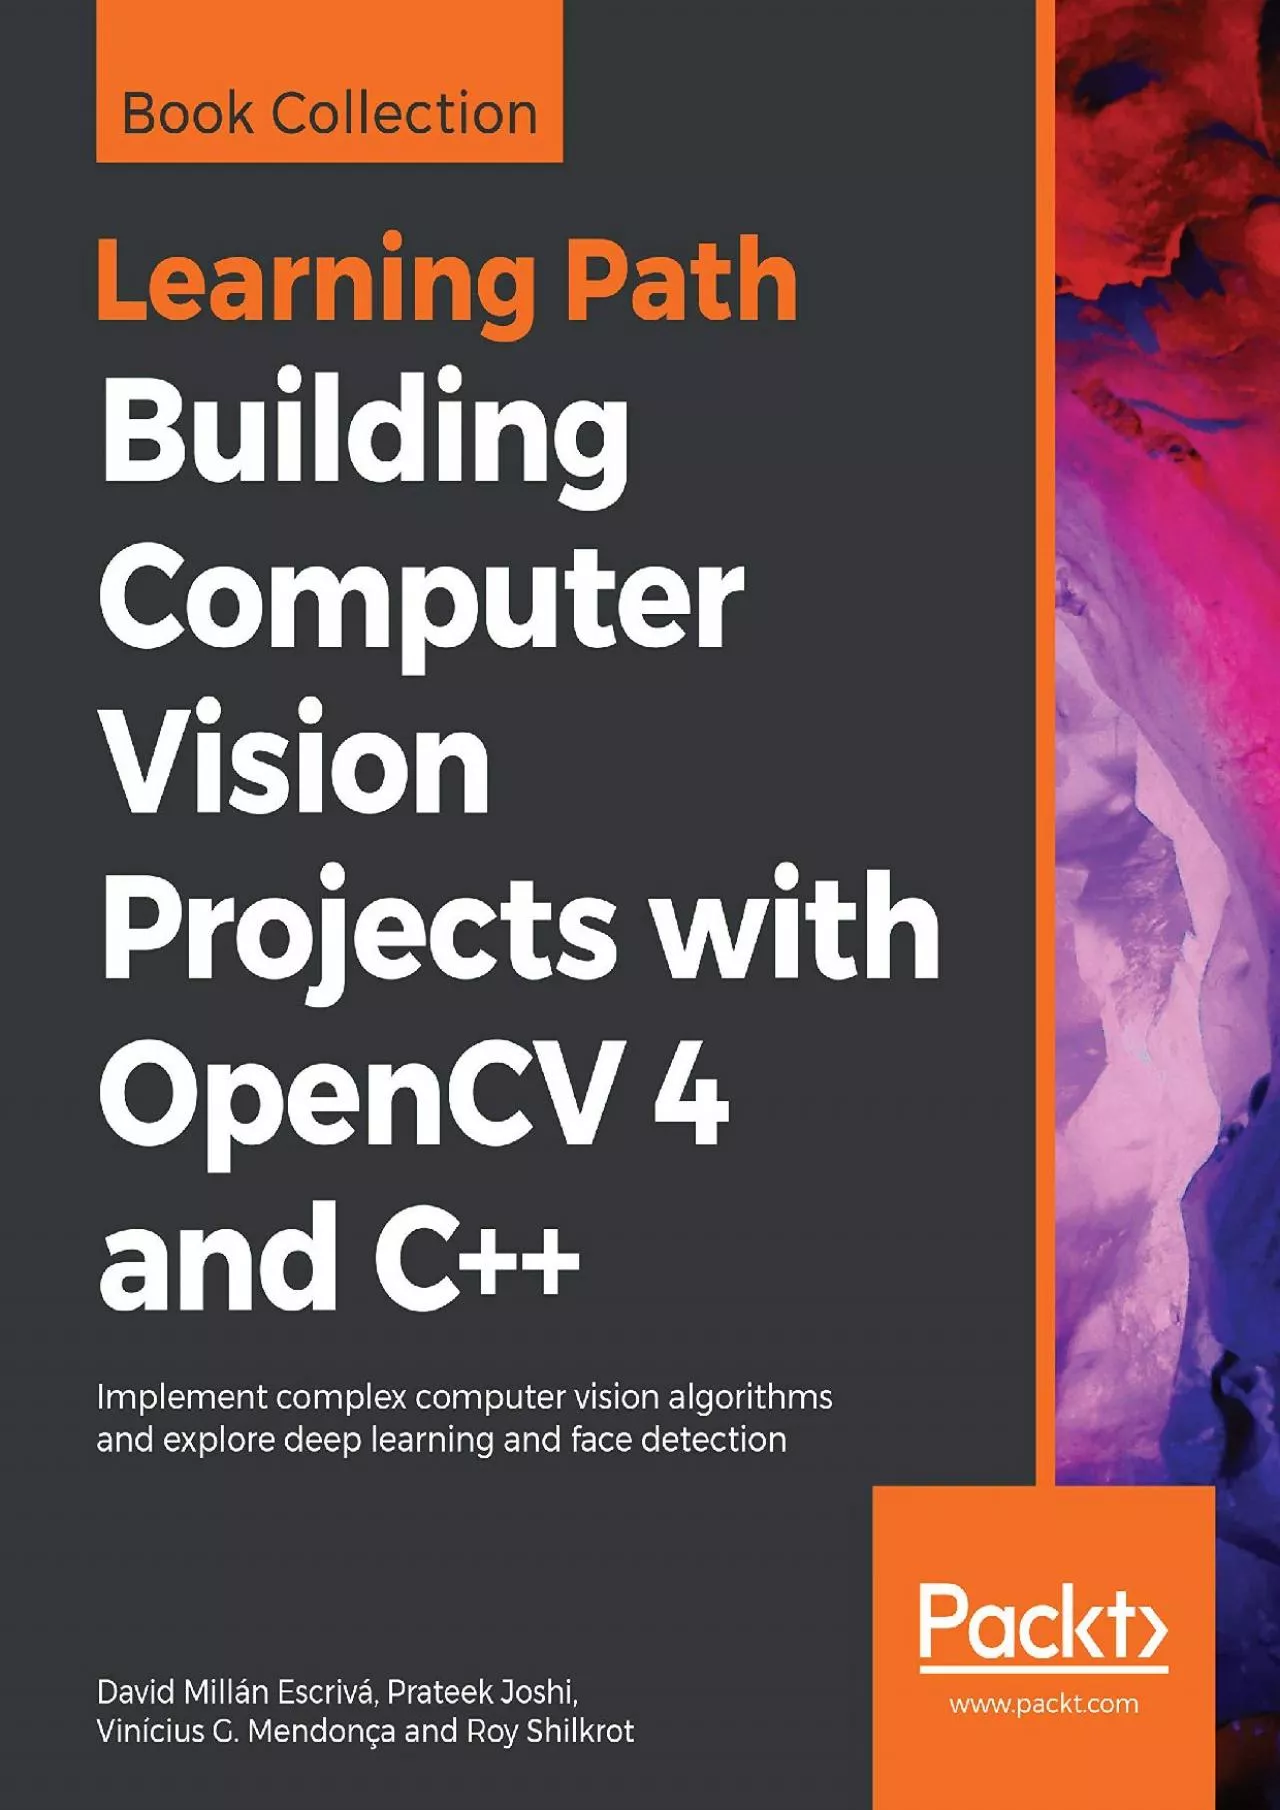 [READING BOOK]-Building Computer Vision Projects with OpenCV 4 and C++: Implement complex